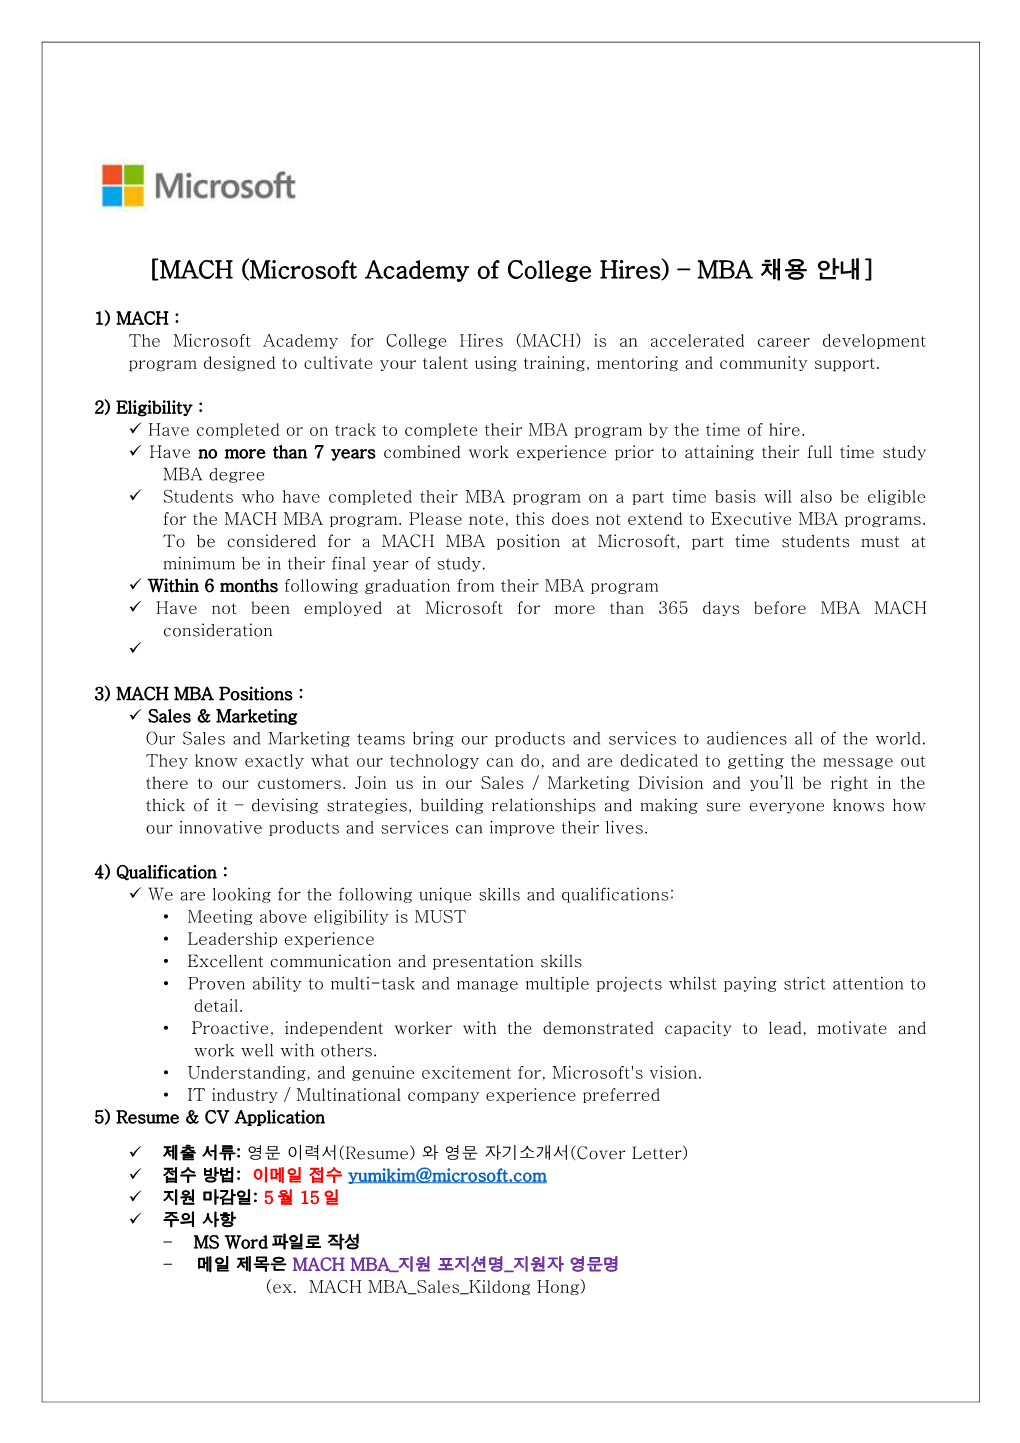 MACH (Microsoft Academy of College Hires) MBA 채용 안내